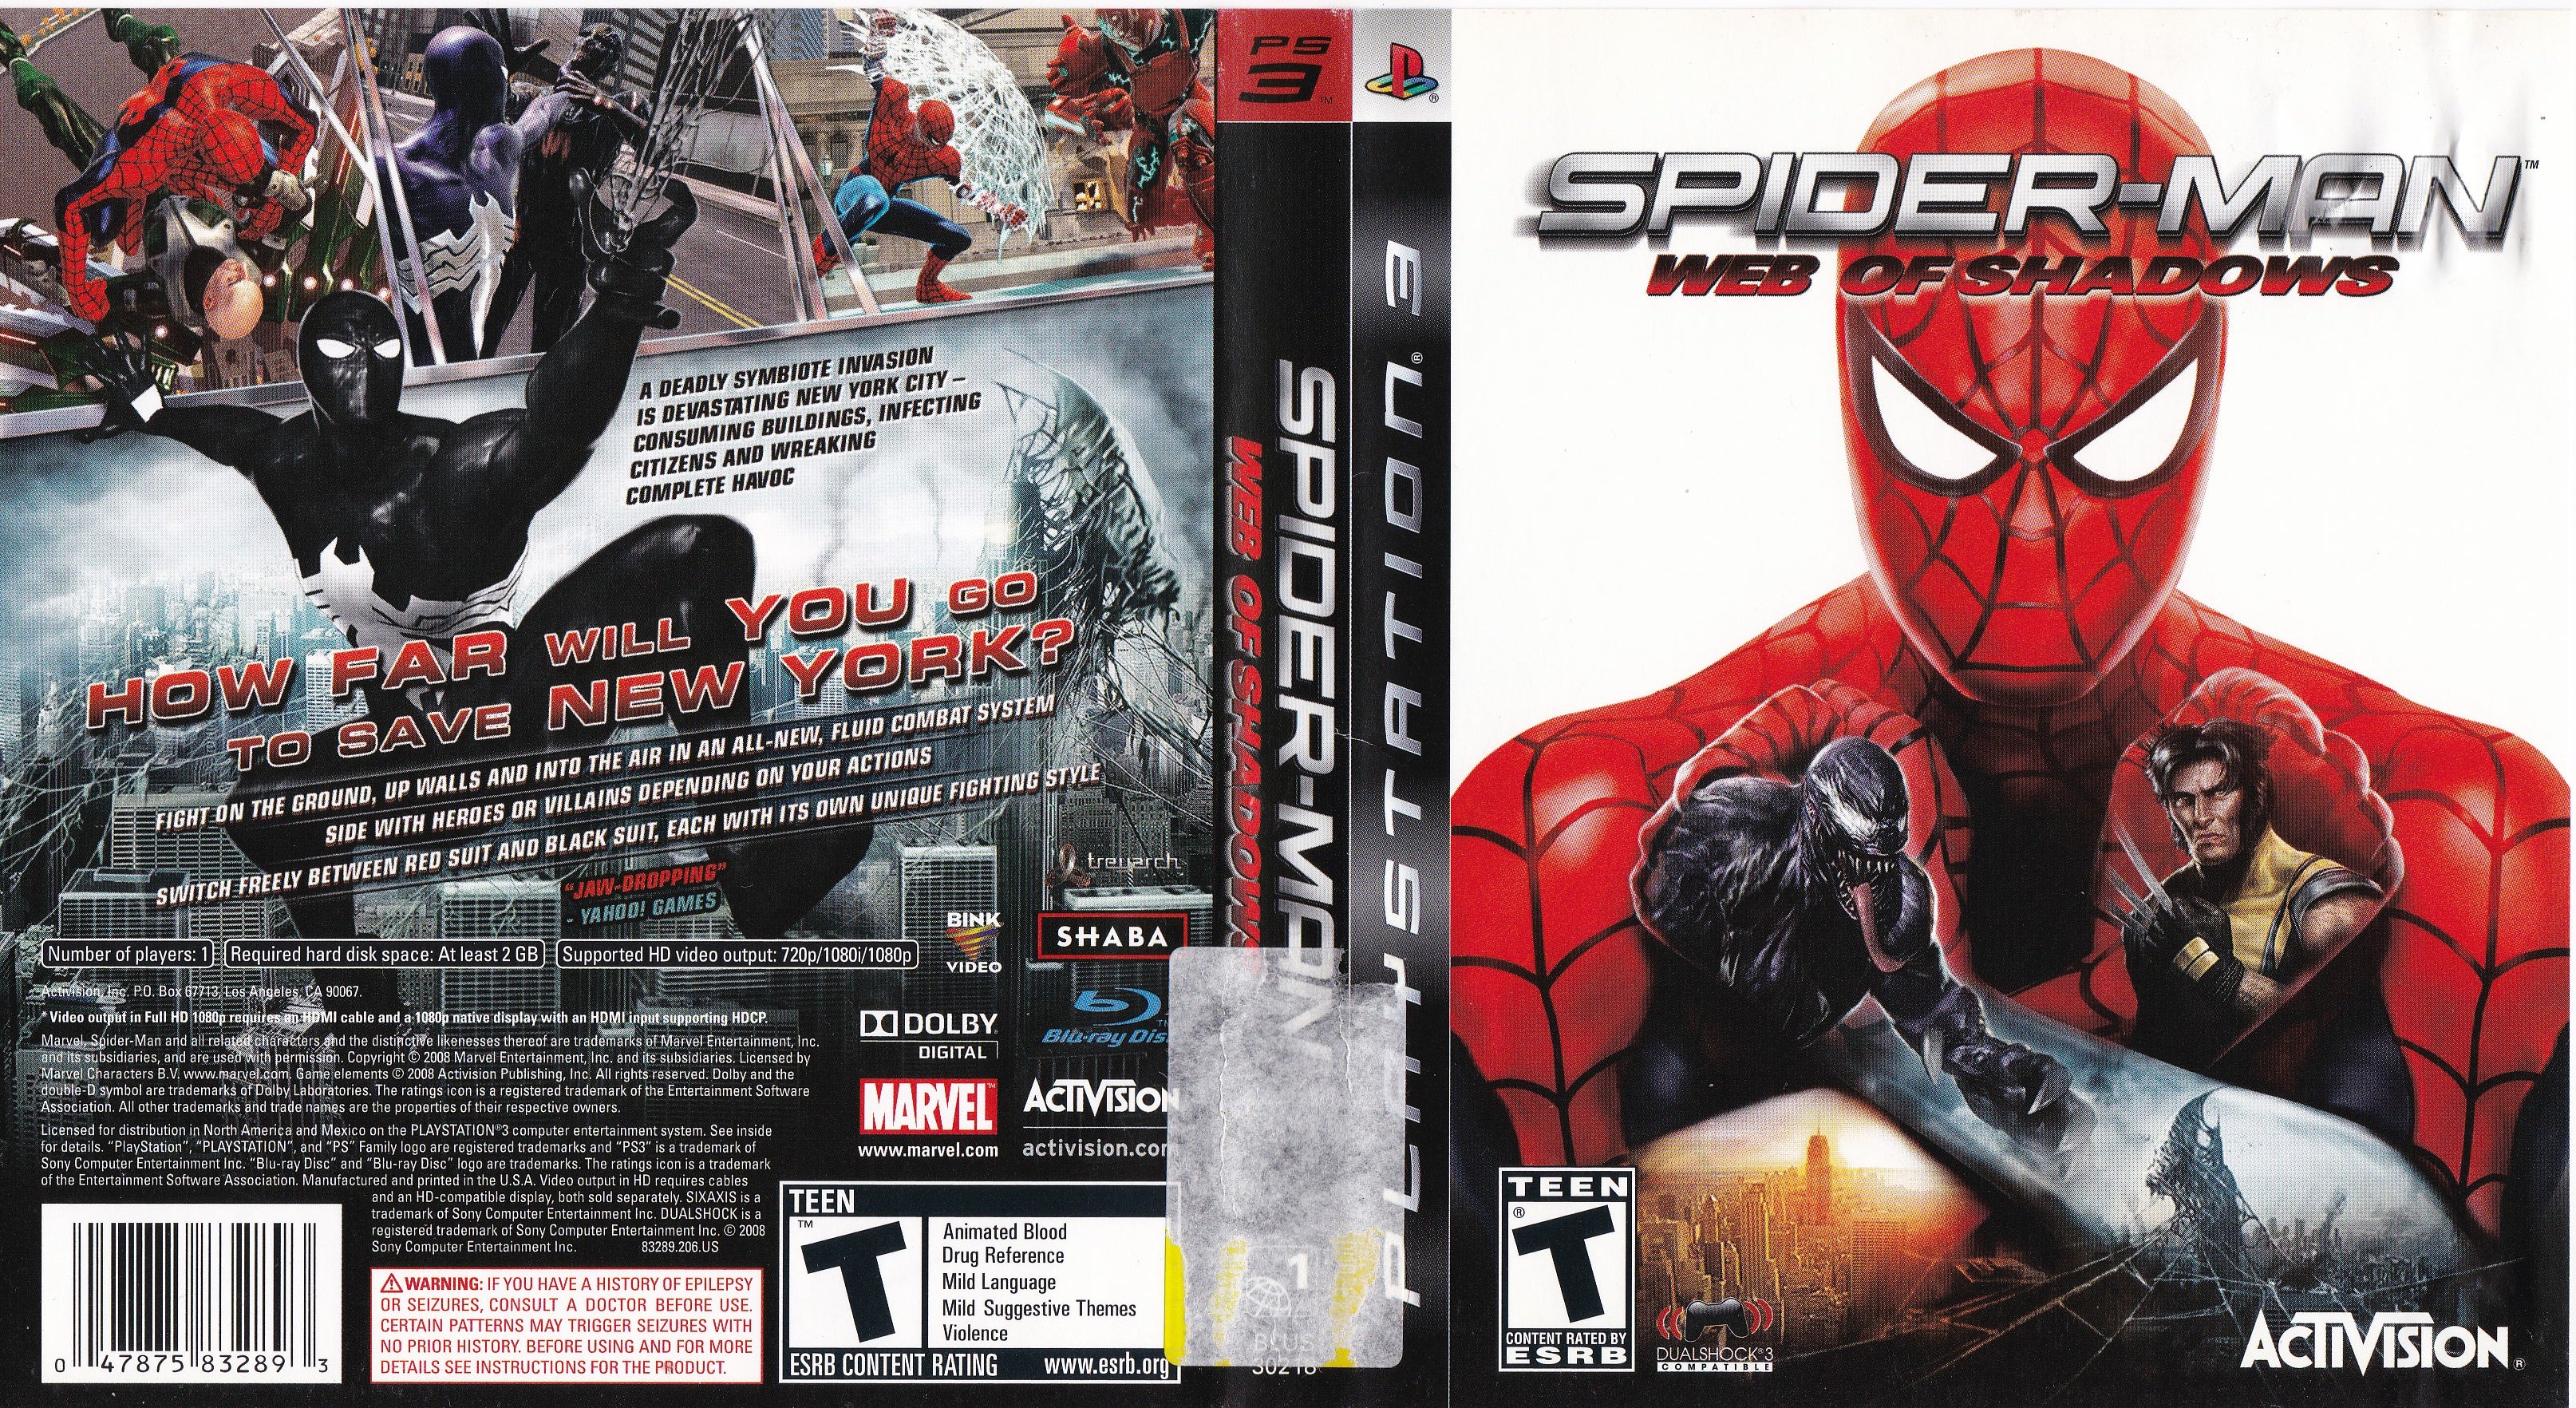 Spider-Man: Web of Shadows Playstation 3 PS3 CASE AND MANUAL ONLY